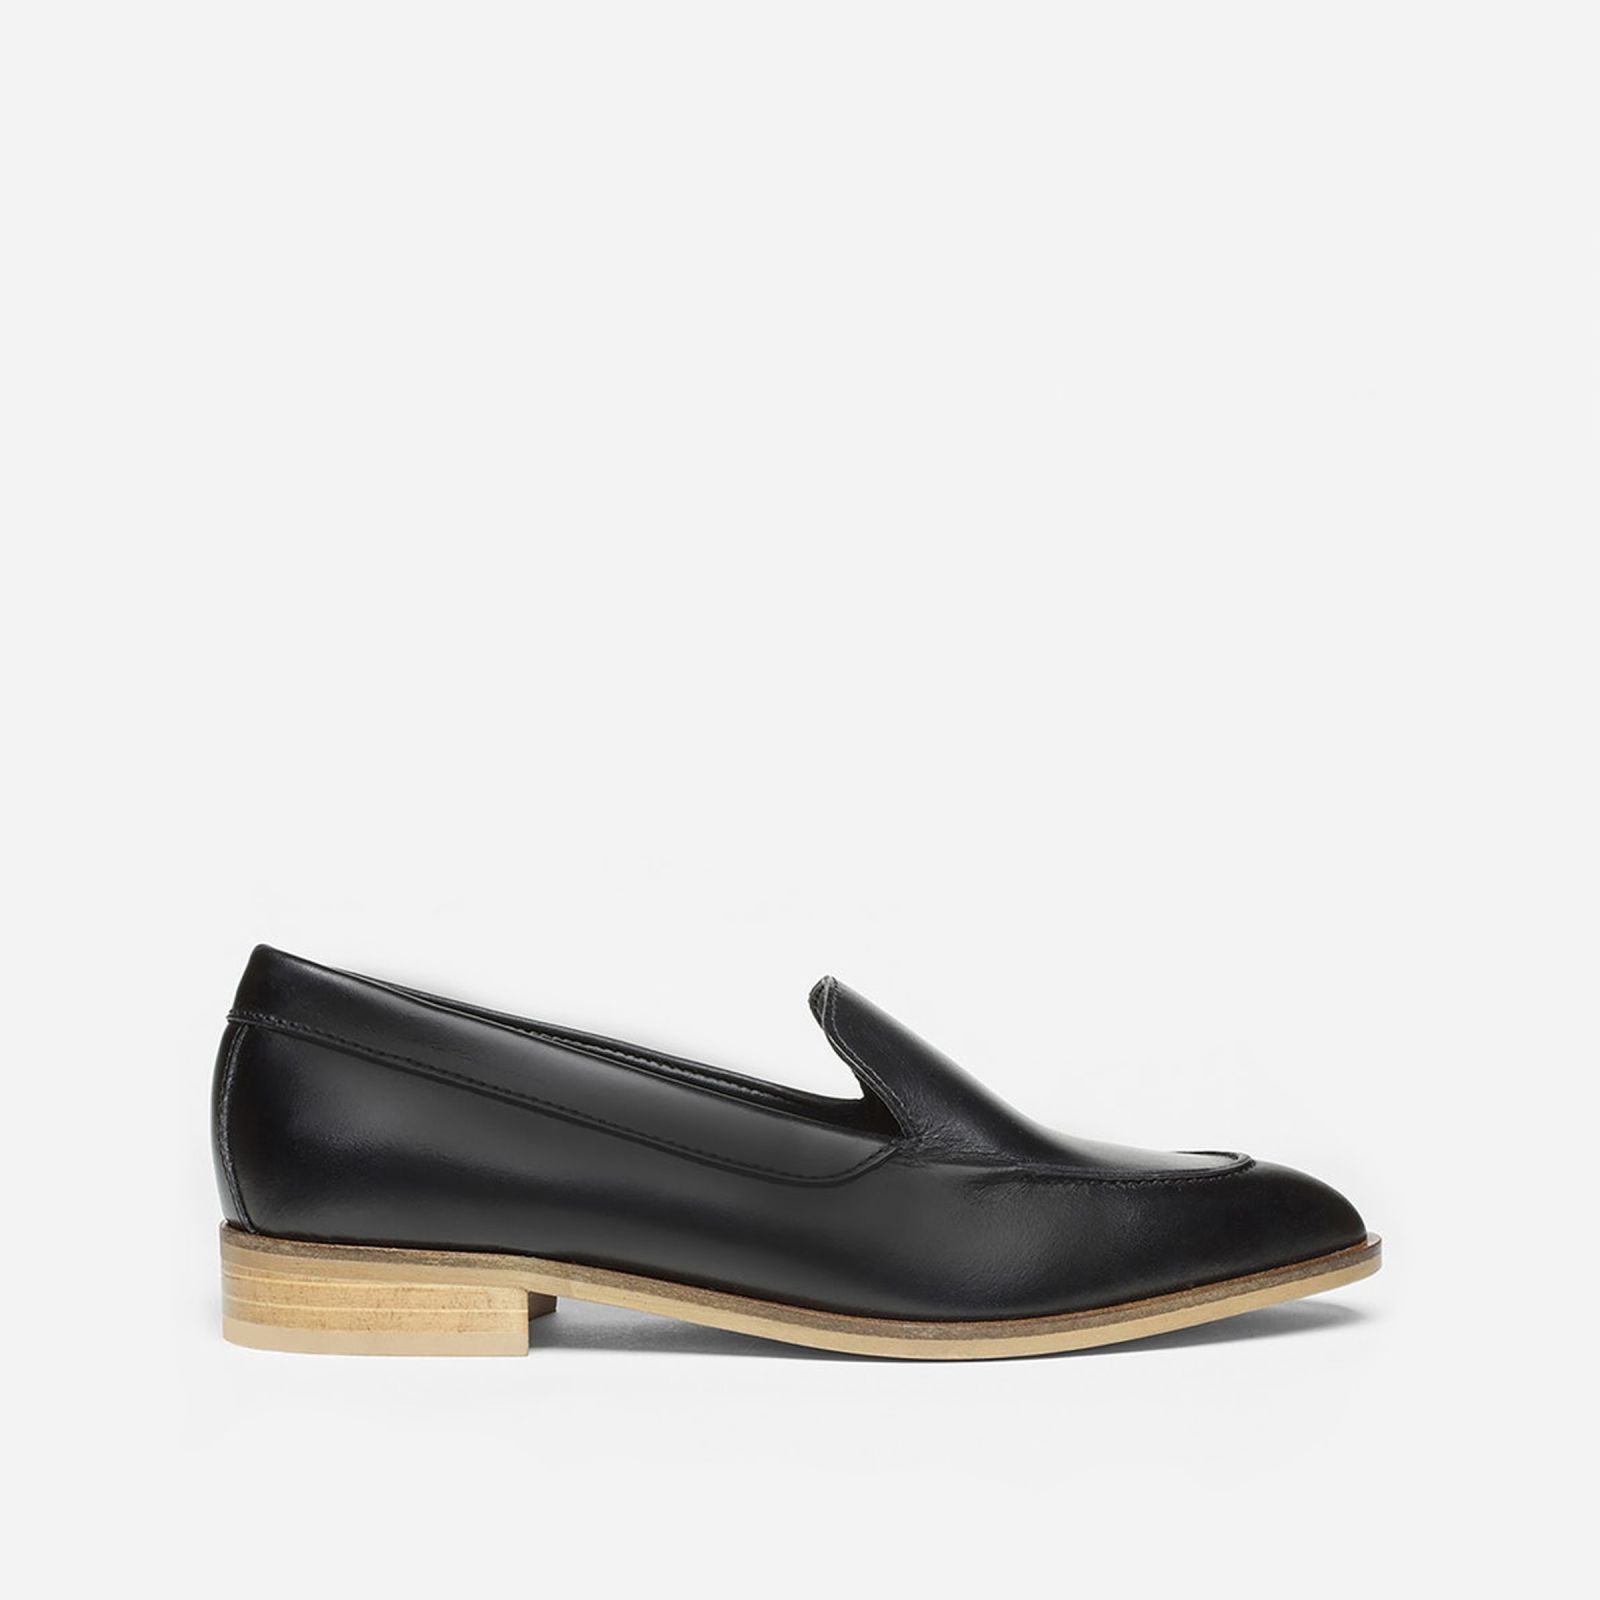 Women's Loafers by Everlane in Black, Size 10.5 | Everlane